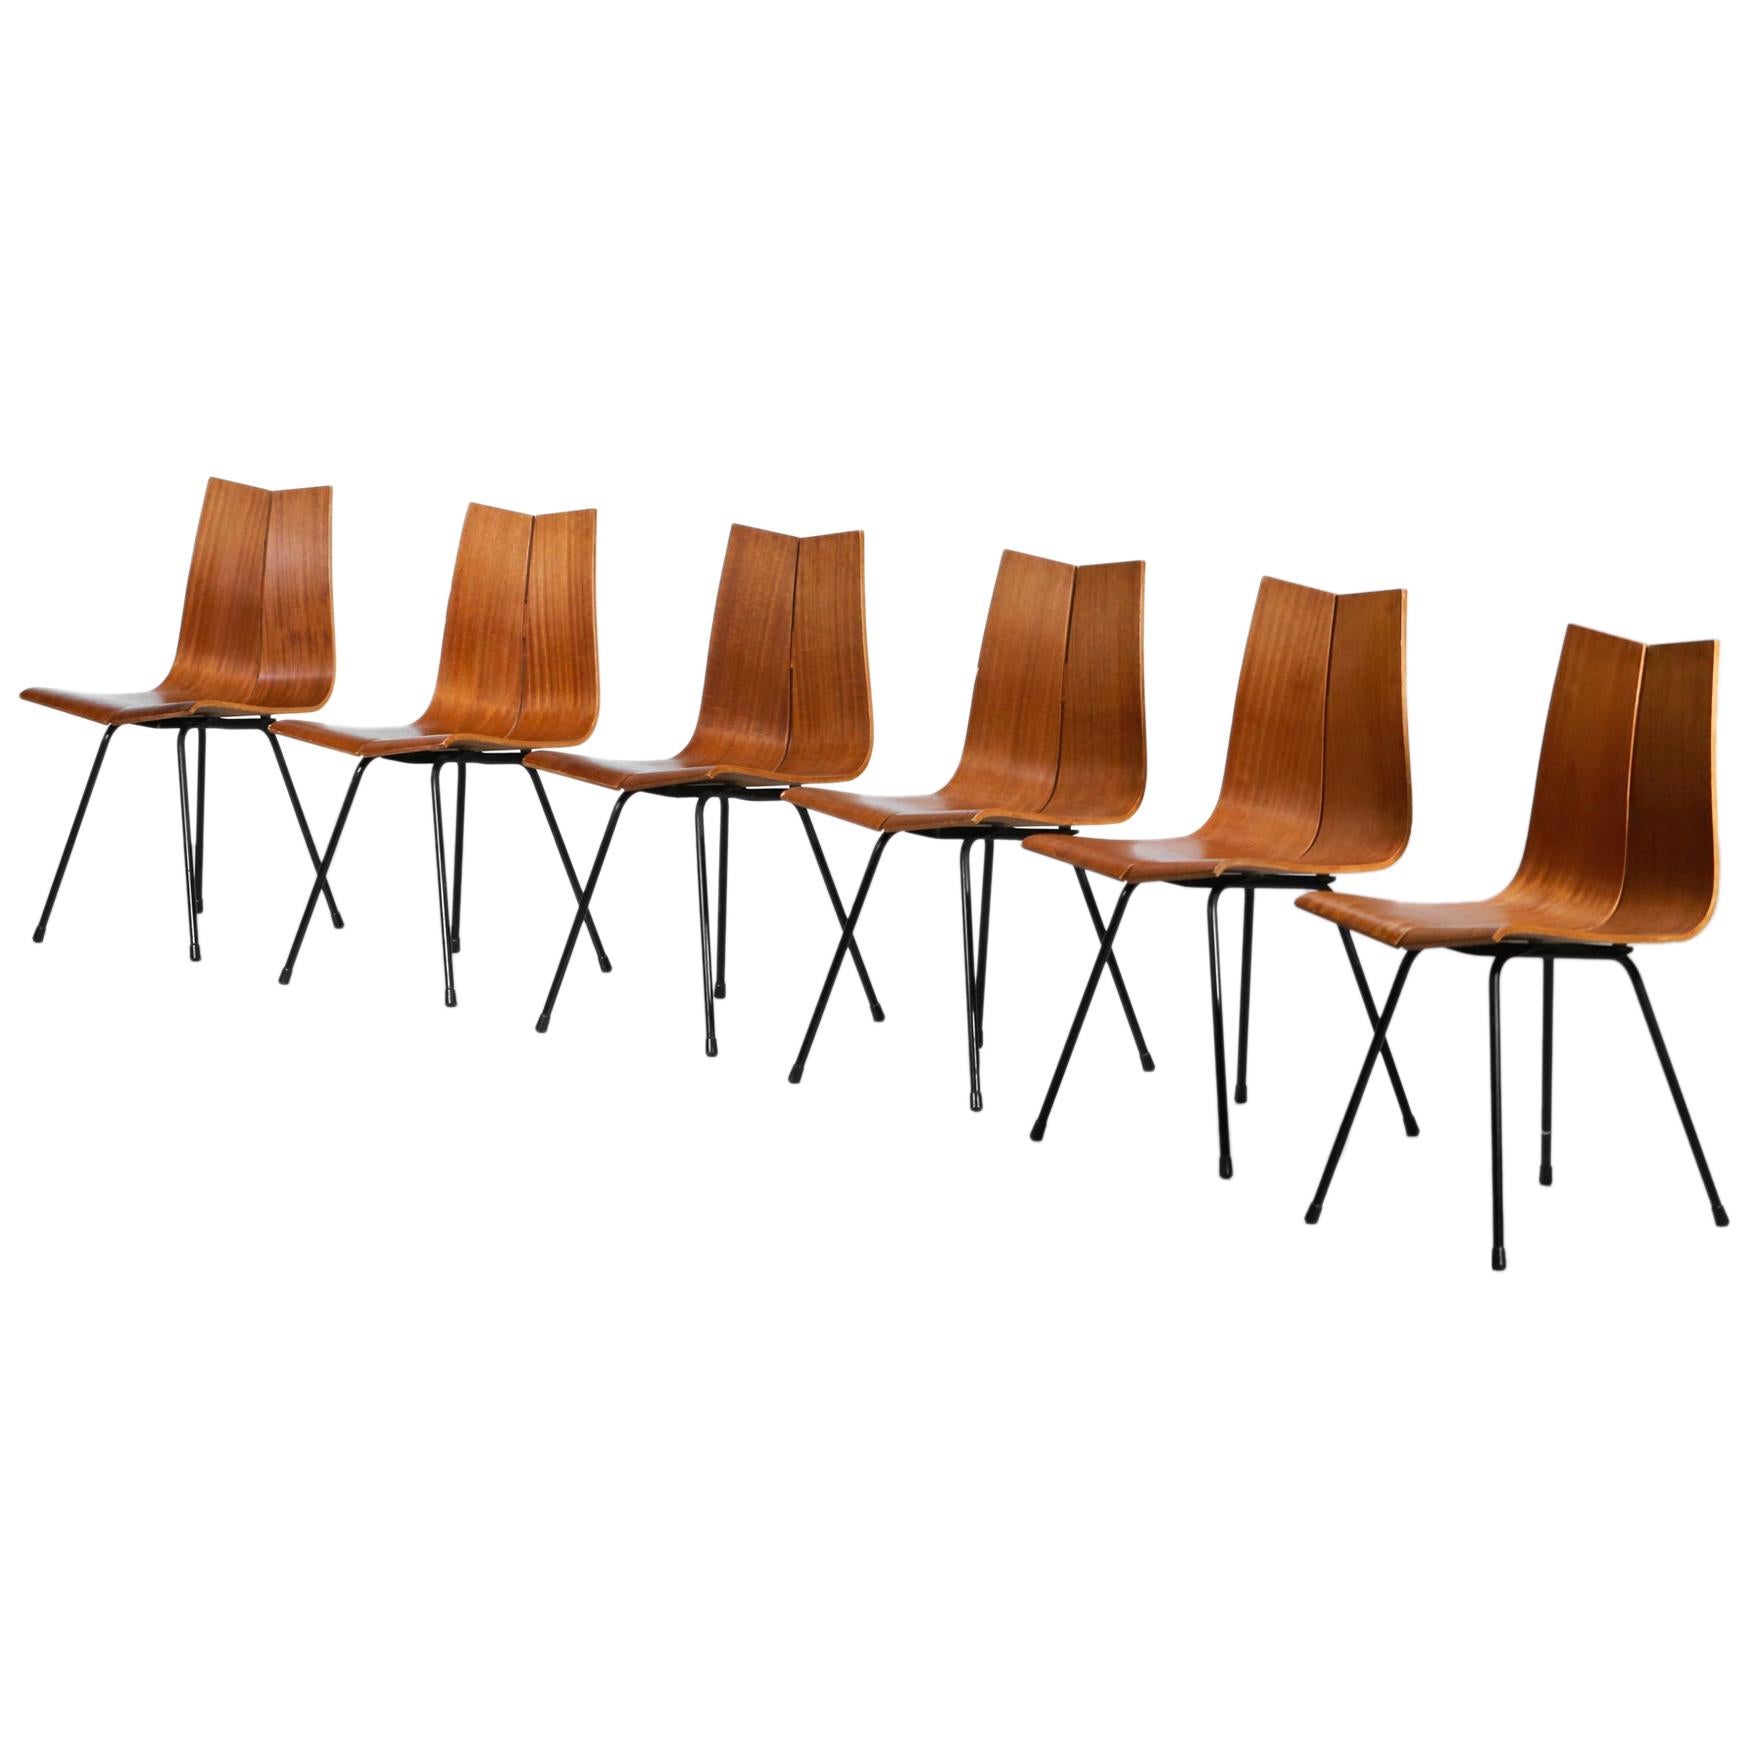 Set of Six GA Chairs from the 1950s by Swiss Designer Hans Bellmann